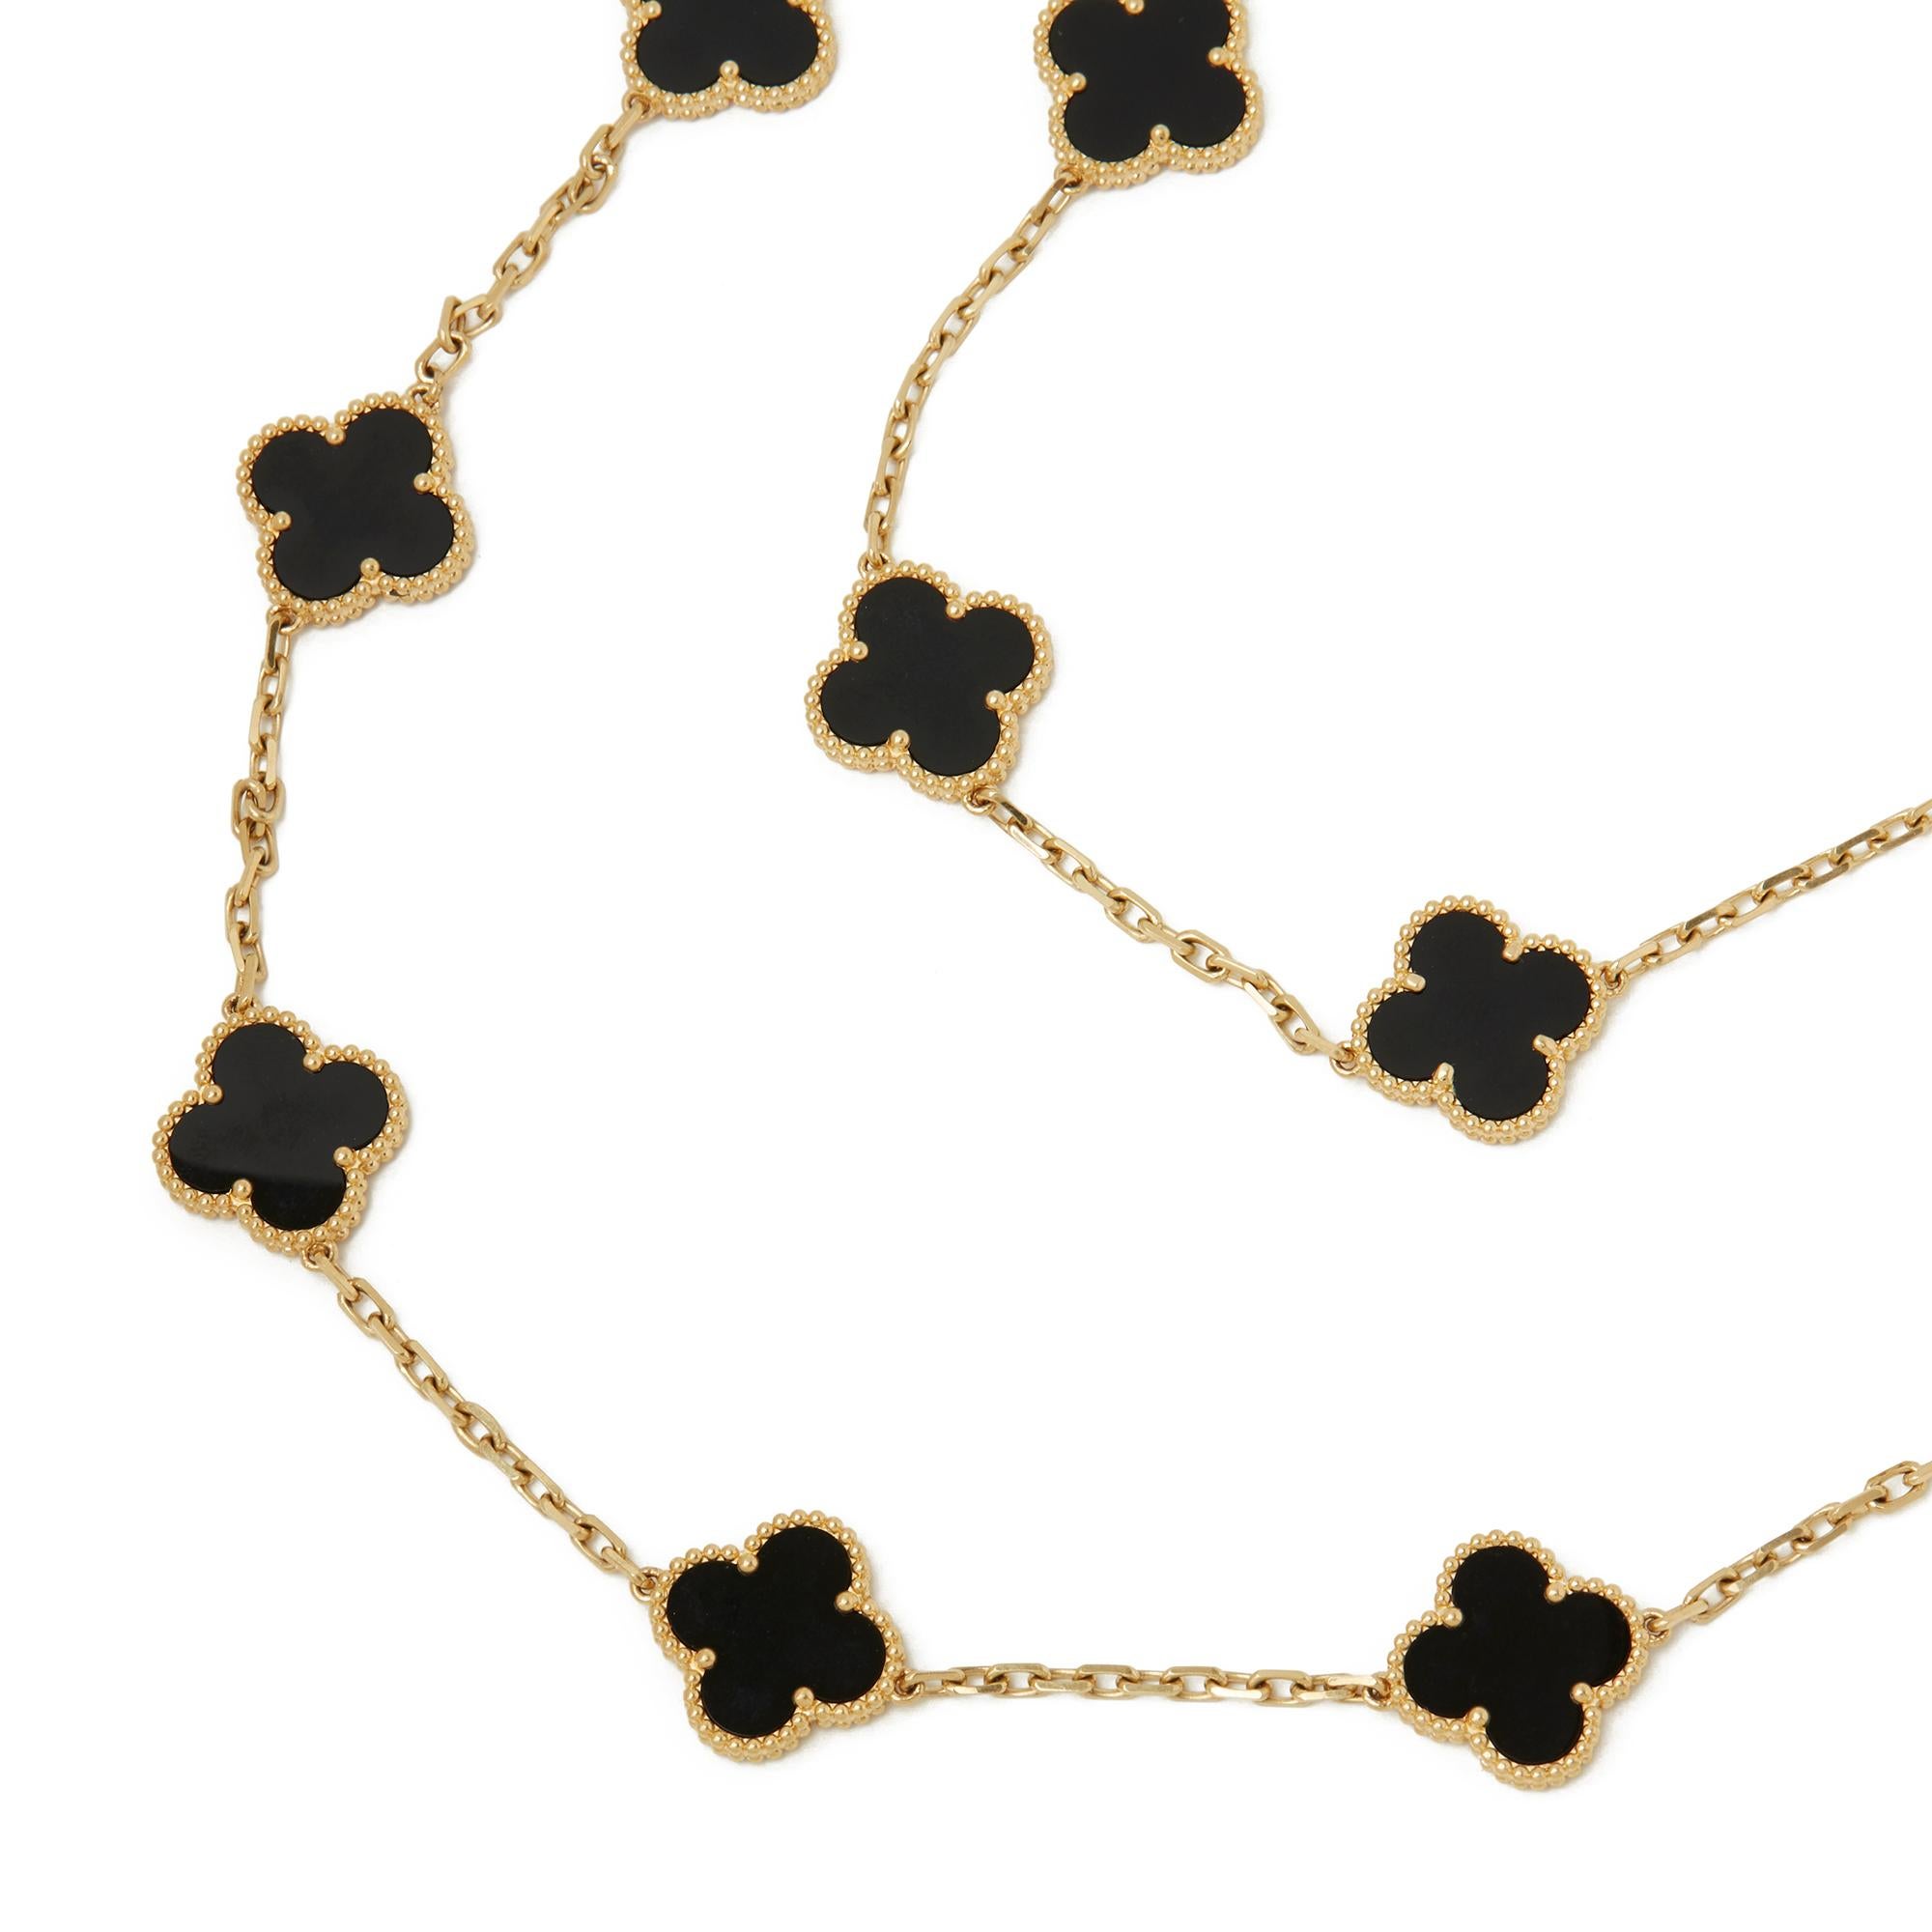 Code: COM2135
Brand: Van Cleef & Arpels
Description: 18k Yellow Gold Onyx 20 Motif Vintage Alhambra Necklace
Accompanied With: Certificate & Presentation Box
Gender: Ladies
Necklace Length: 82cm
Necklace Width: 1.5cm
Clasp Type: Lobster
Condition: